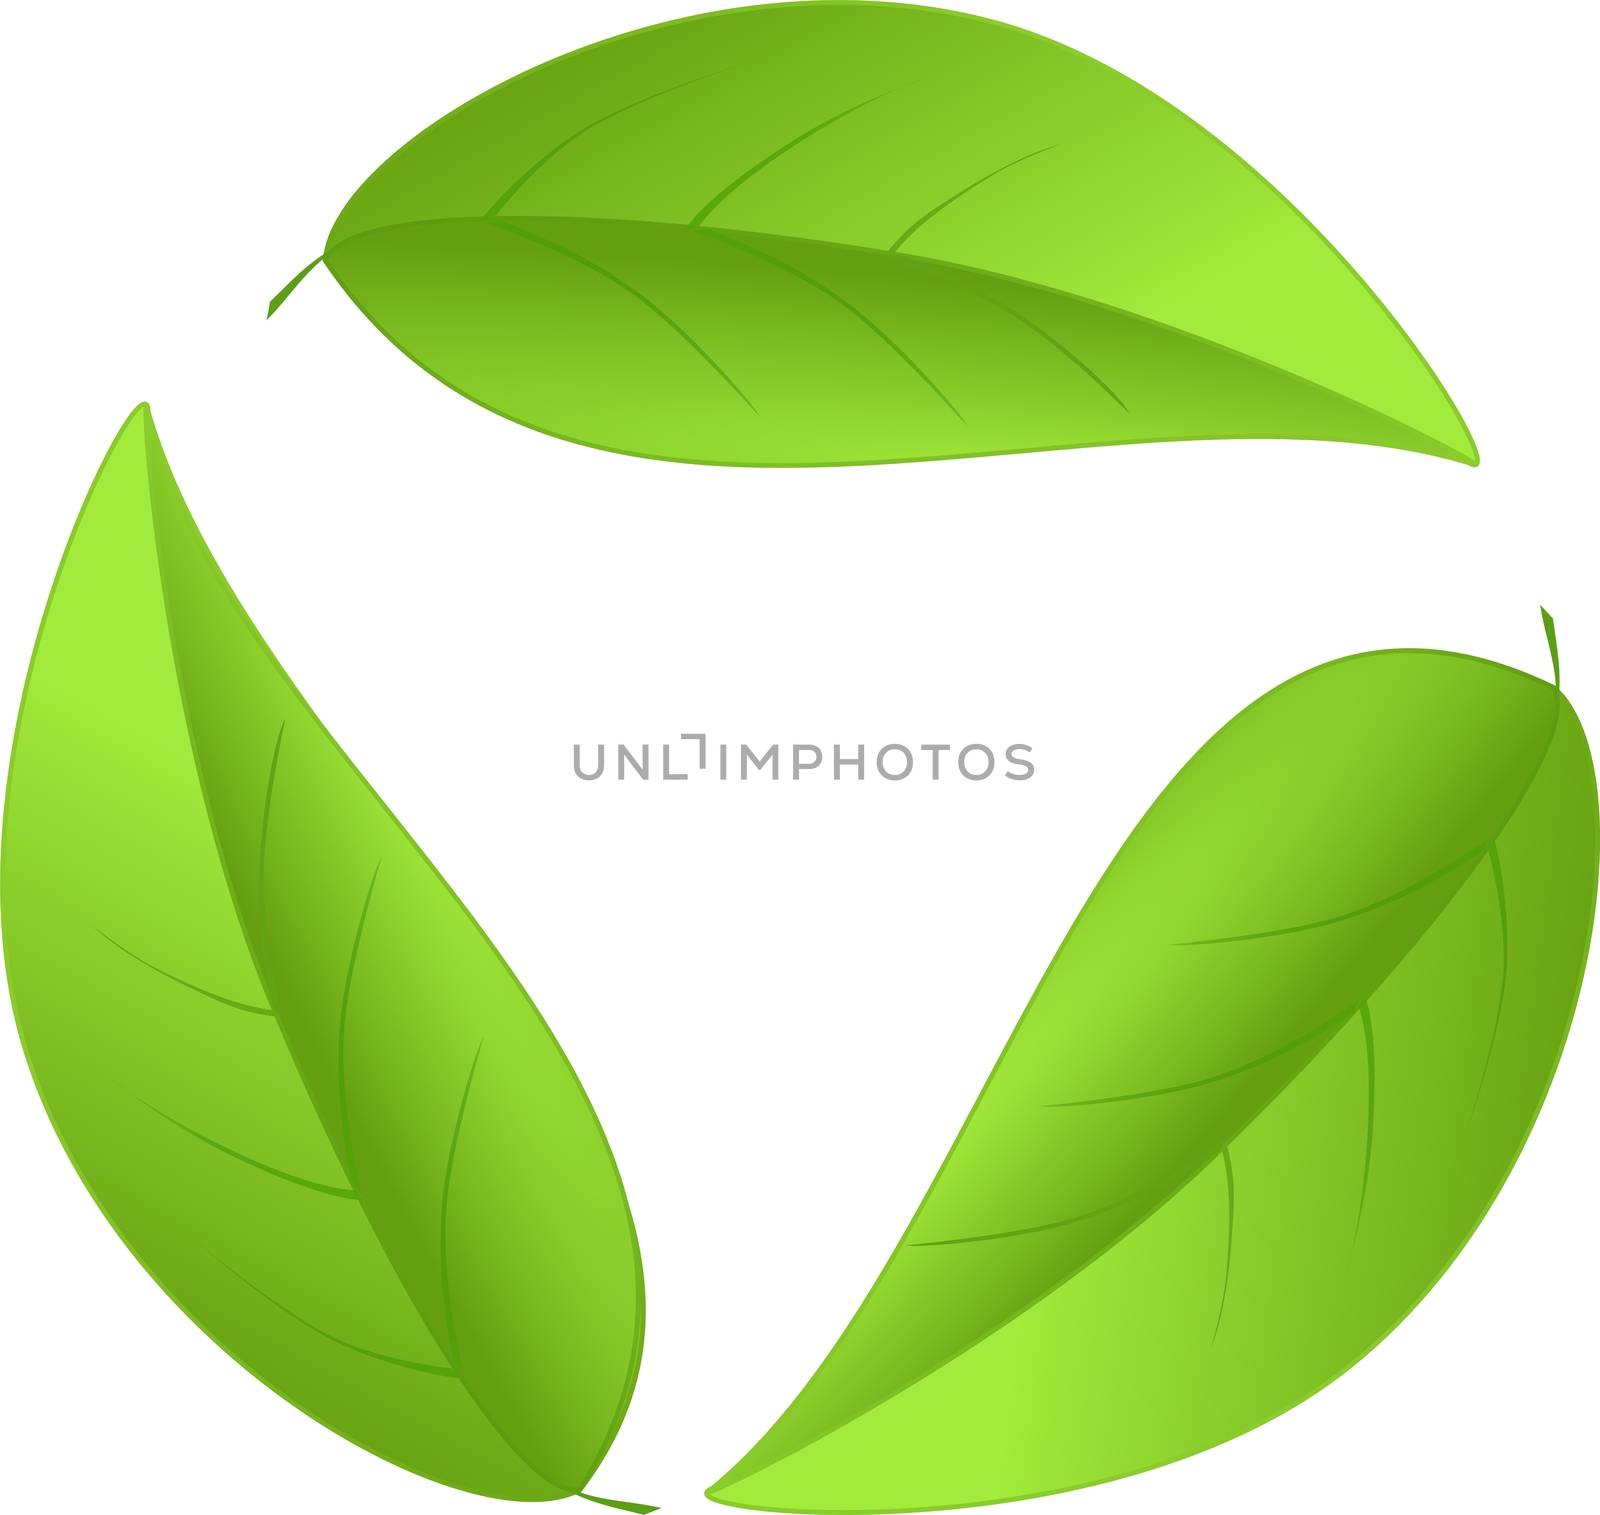 Recycling icon from leaves isolated on a white background